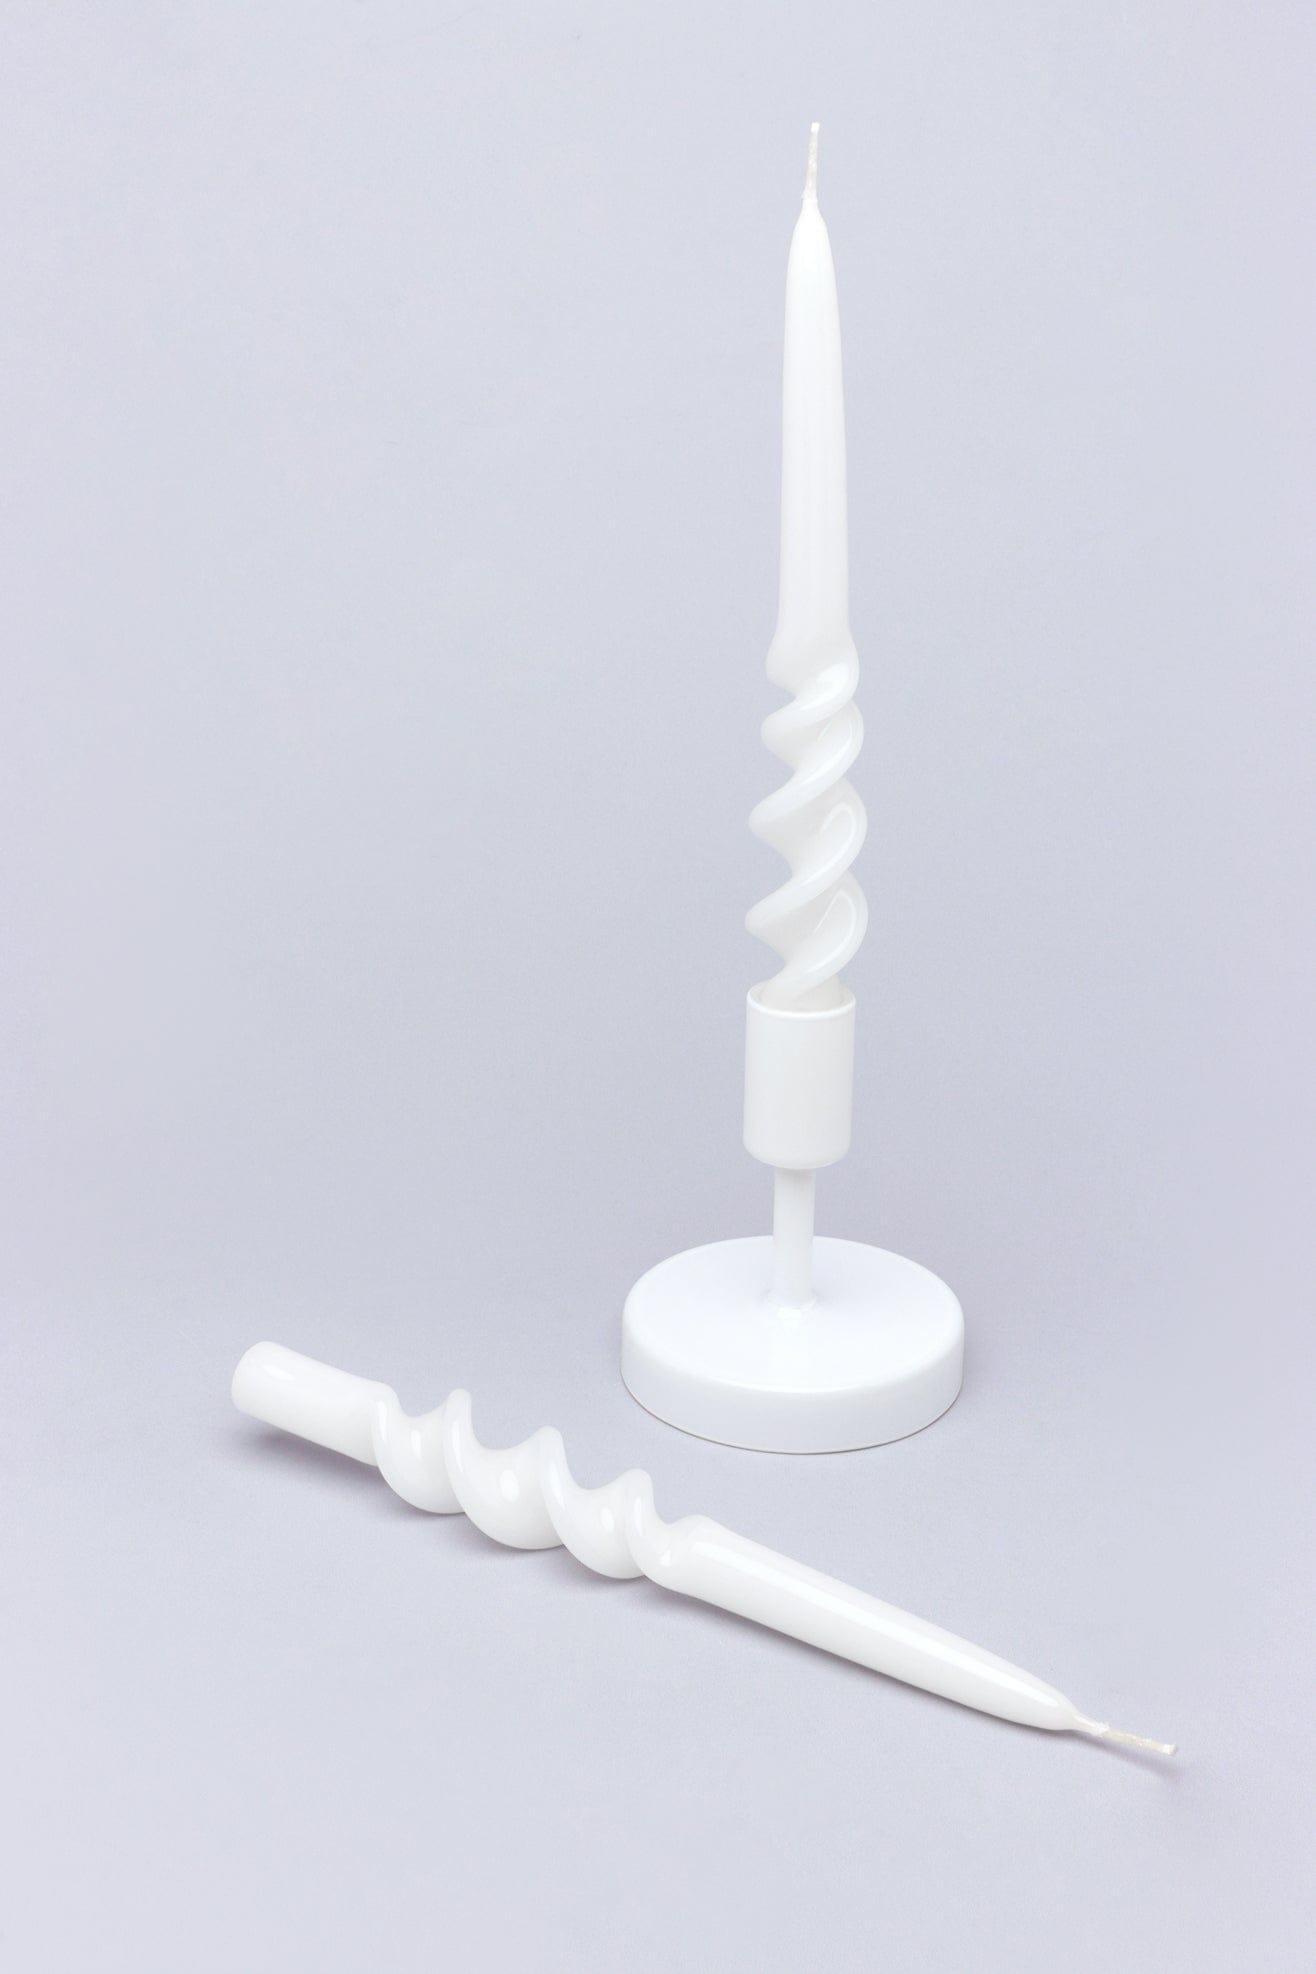 G Decor Candles & Candle Holders White Set of 2 White 9-inch Spiral Twisted Hand Dipped Candlesticks Taper Church Dinner Candles